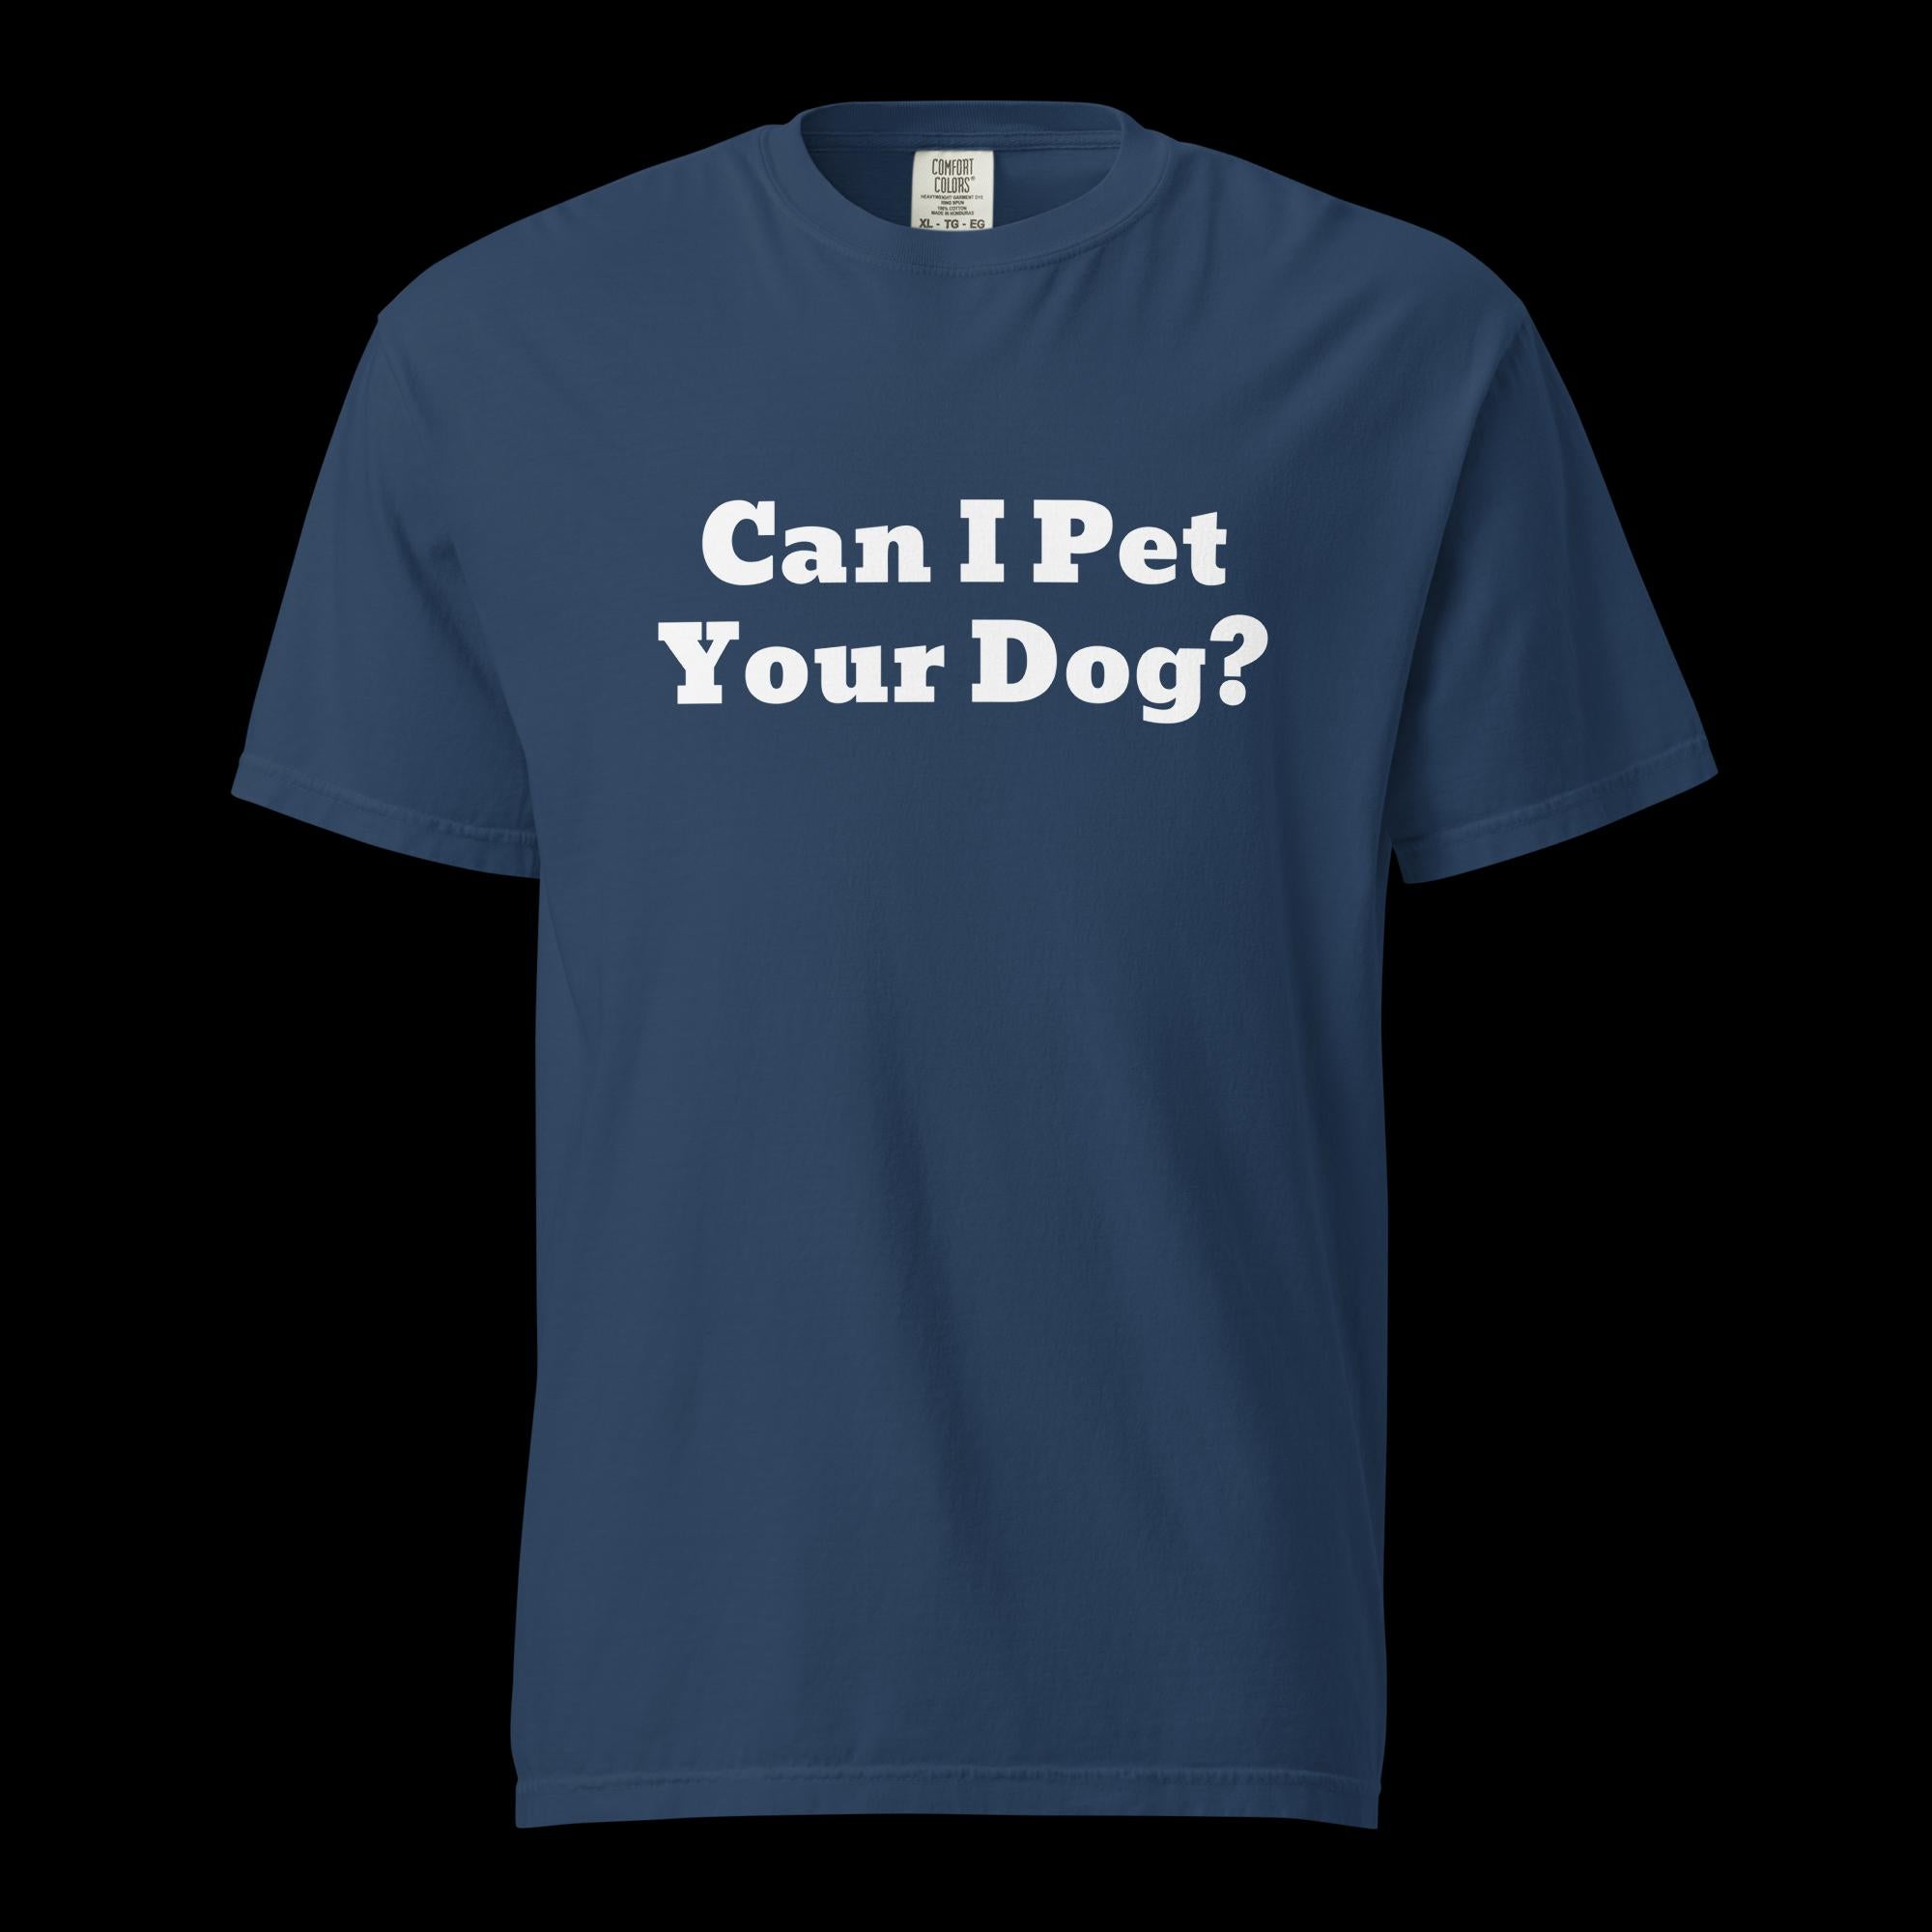 Can I Pet Your Dog Unisex Garment-Dyed Heavyweight T-Shirt